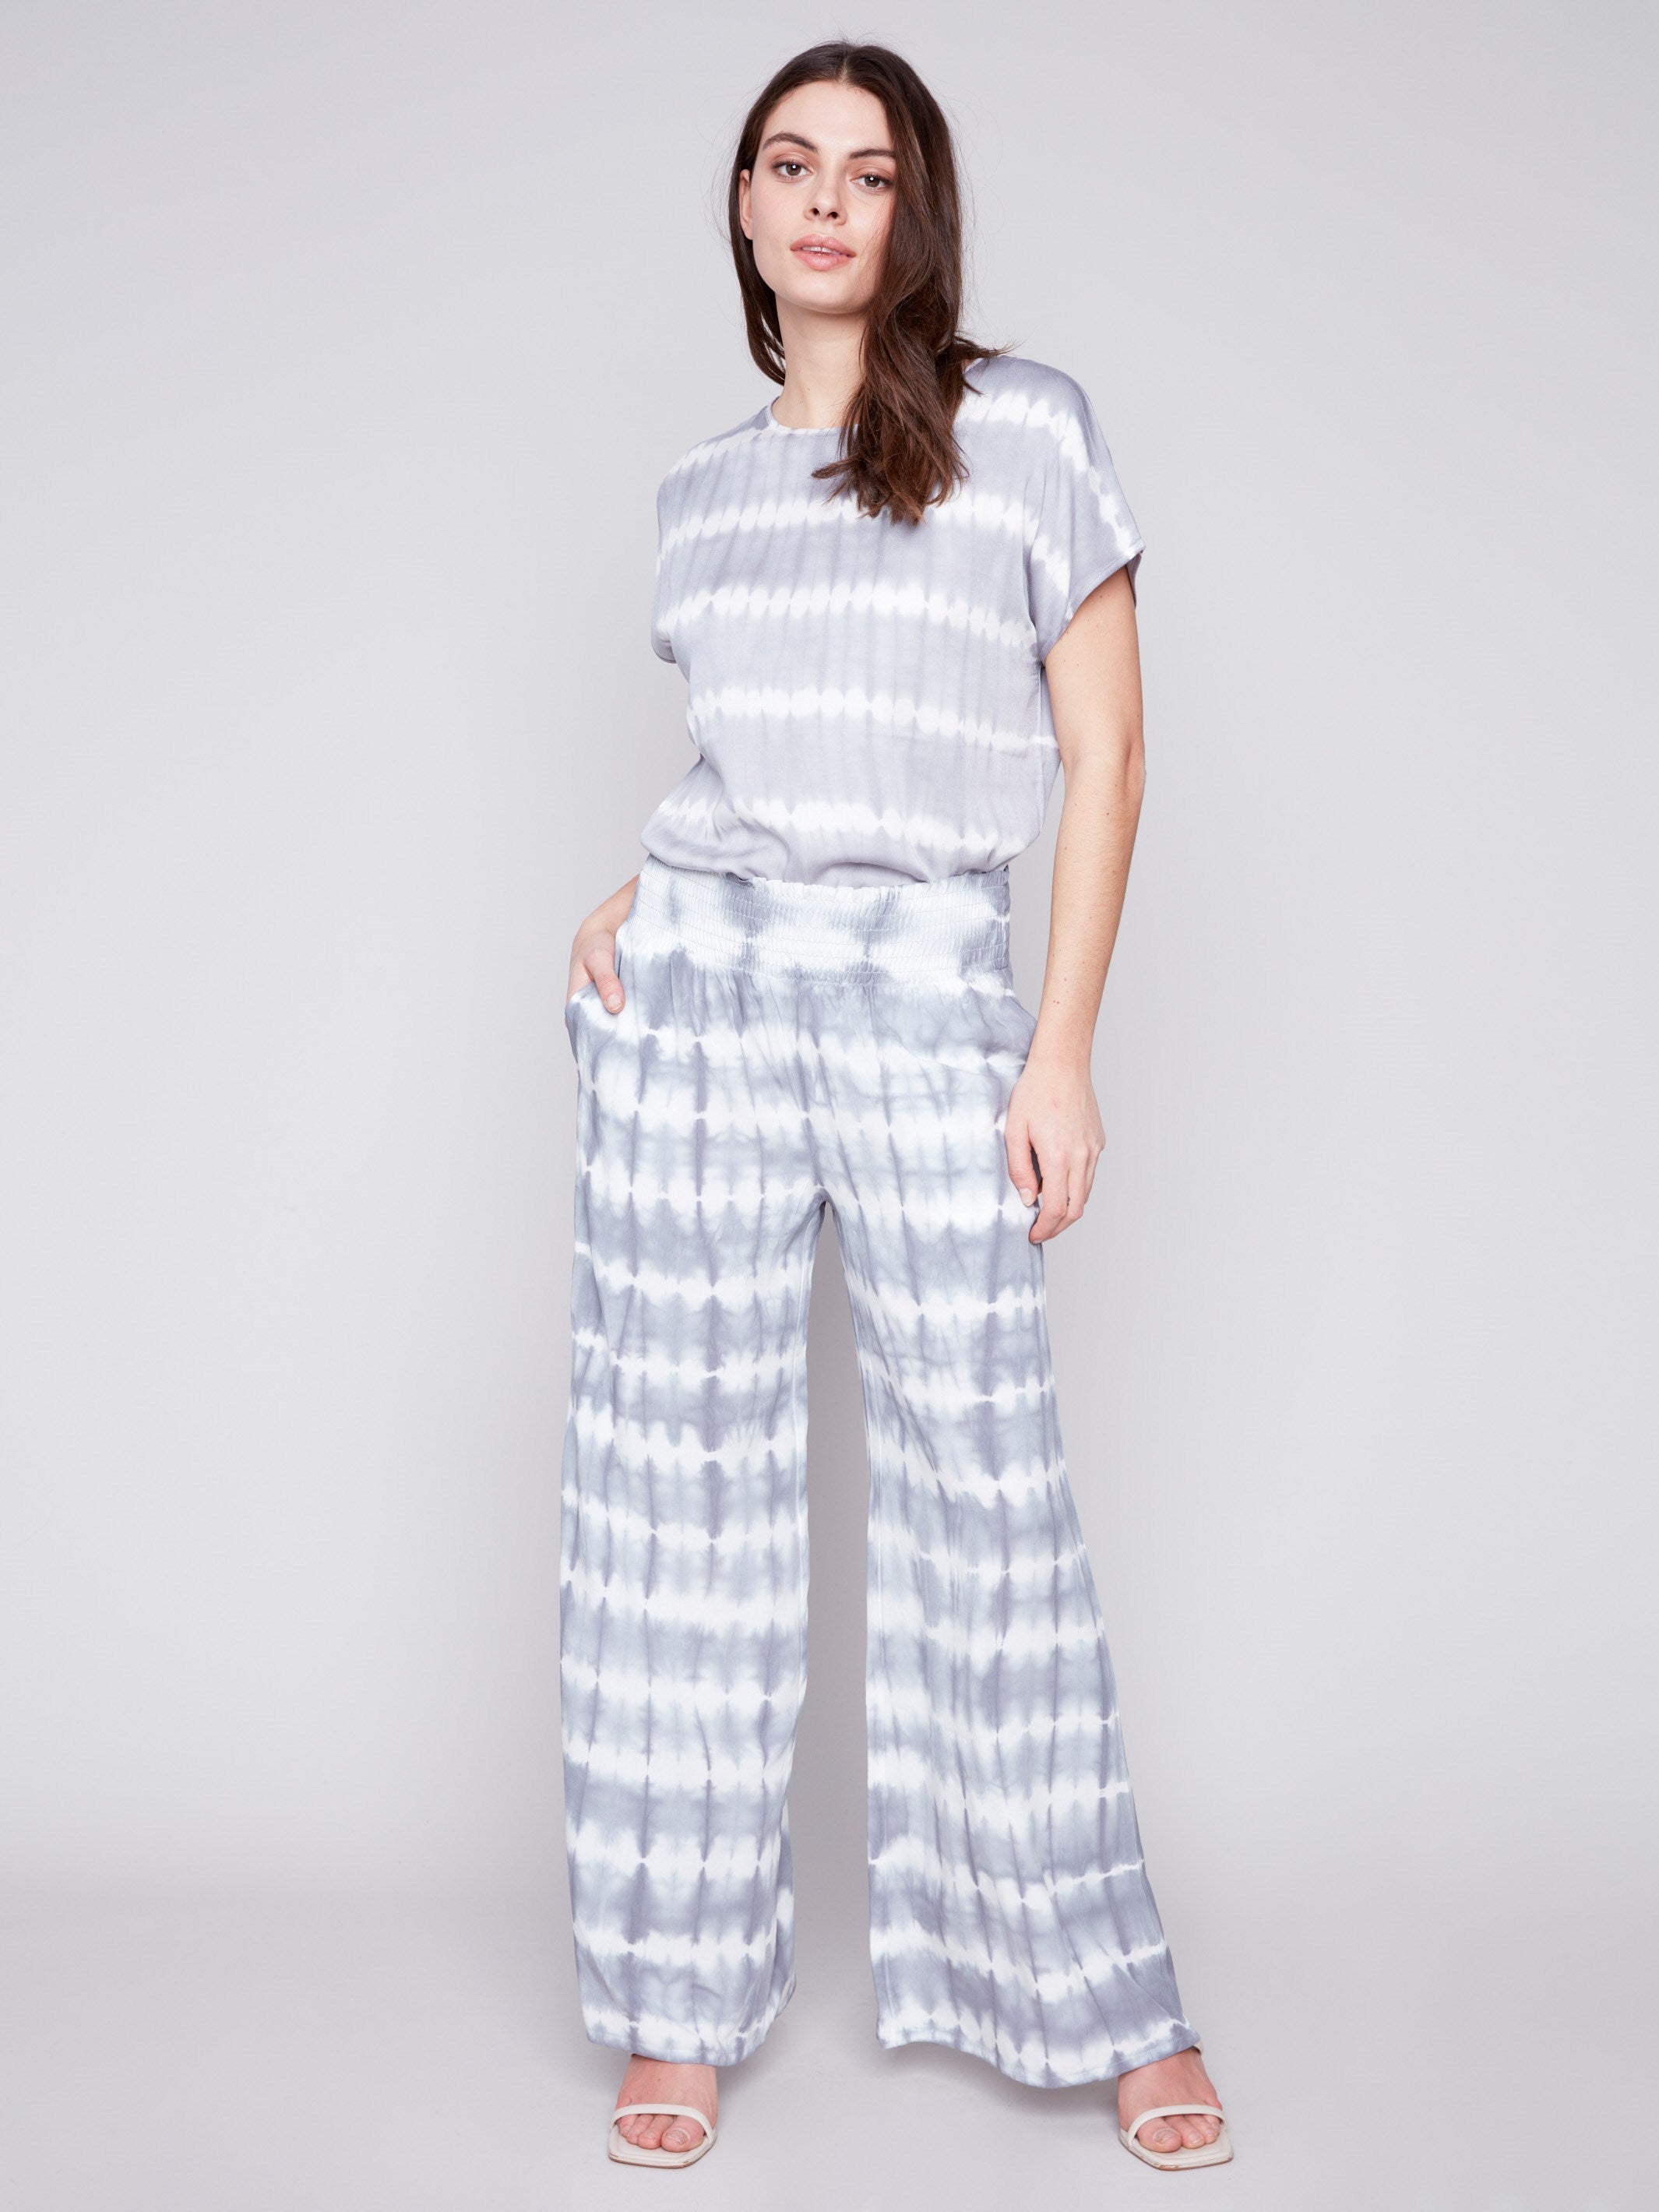 Printed Flowy Palazzo Pants - Ceramic - Charlie B Collection Canada - Image 1